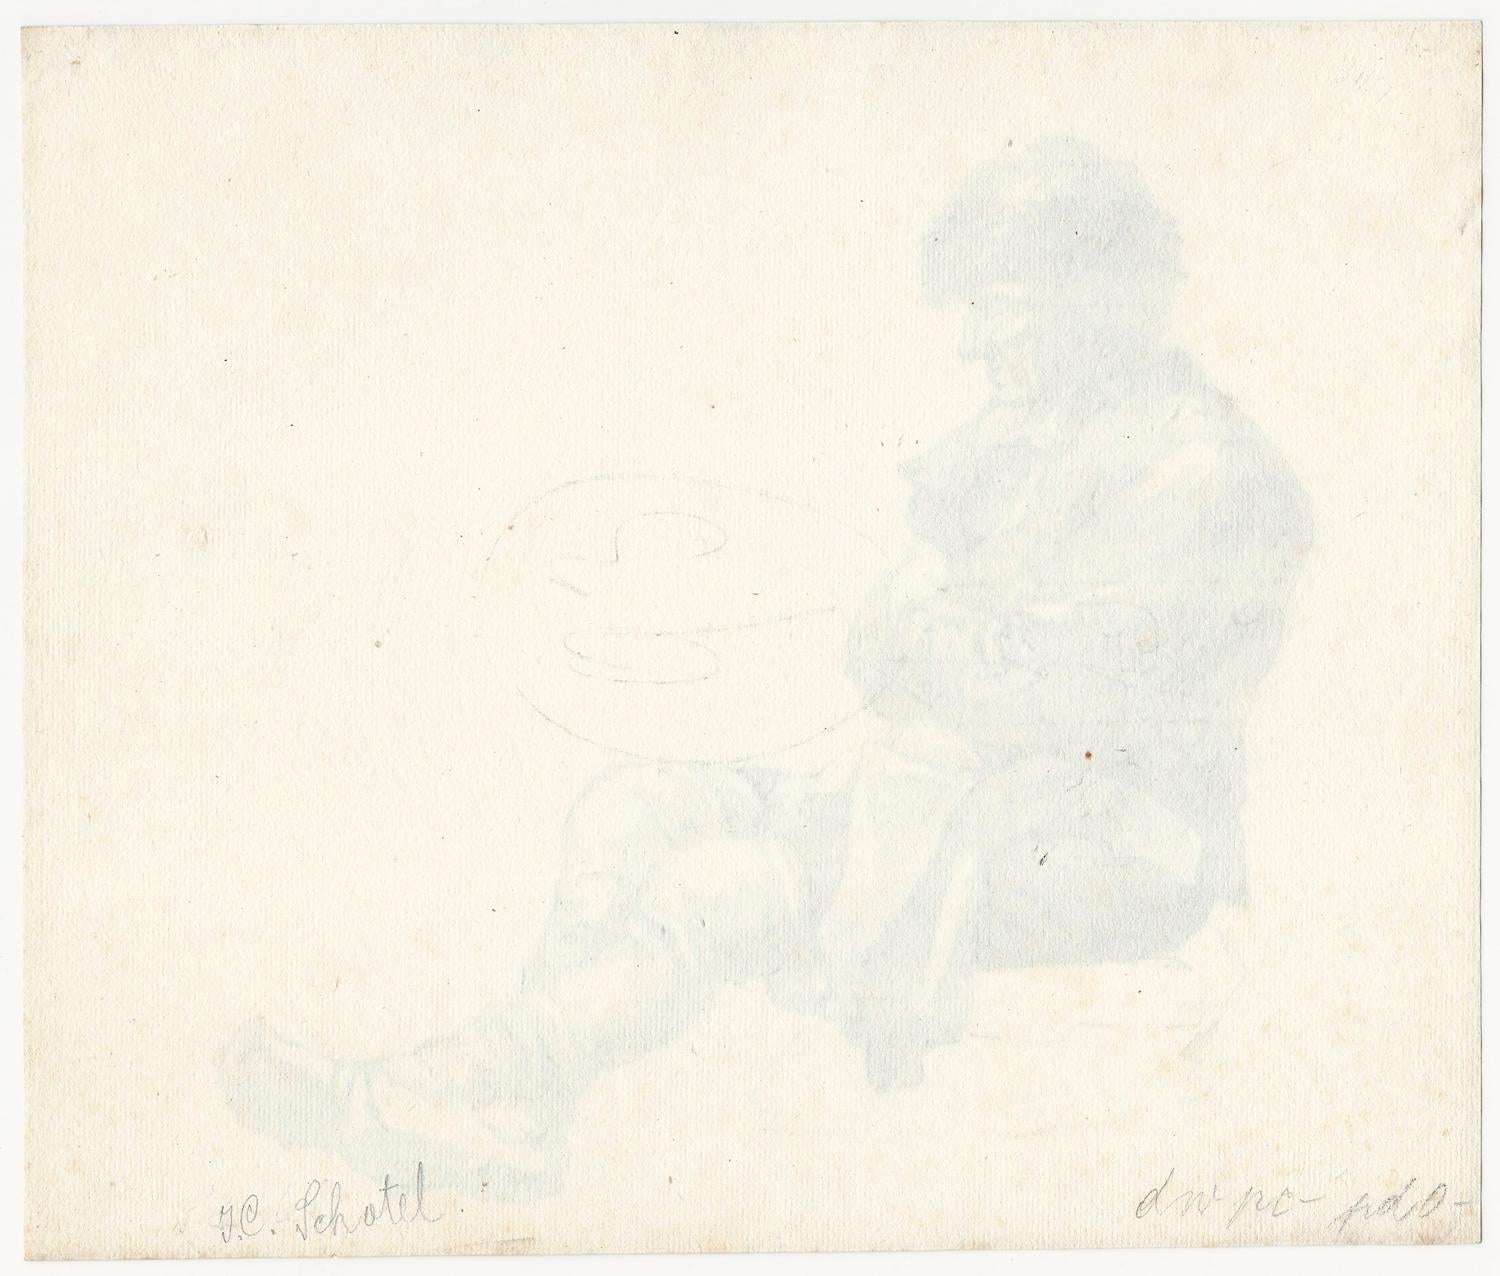 19th C Dutch Old Master Drawing Johannes Christiaan Schotel Study of Seated Man - Old Masters Art by Johannes Christianus Schotel